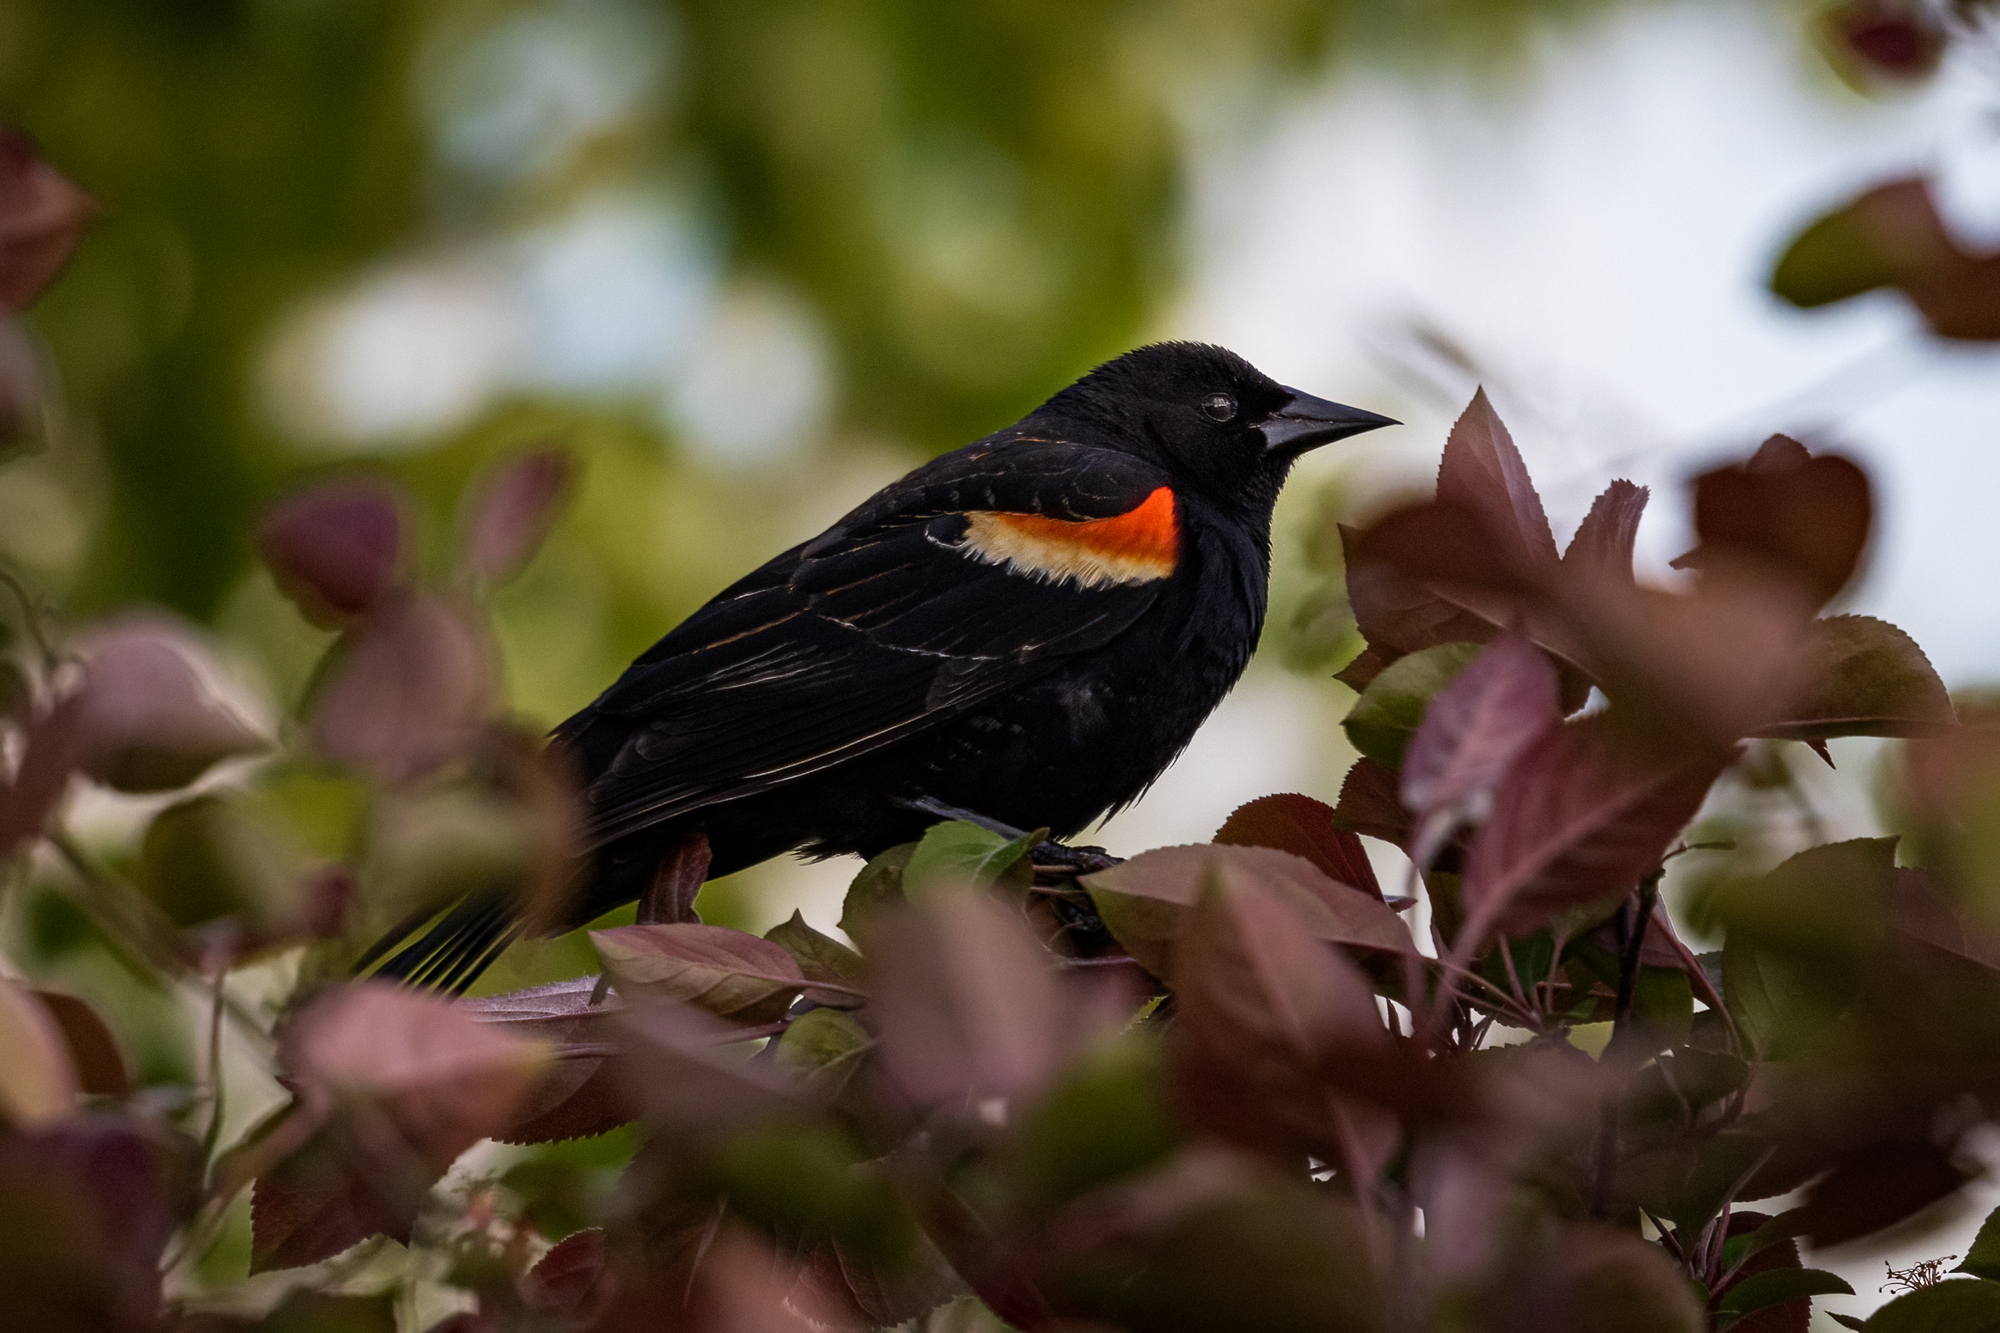 Red-winged Blackbird sitting on a leafy tree branch. Leaves are mostly a burgundy colour, some are green